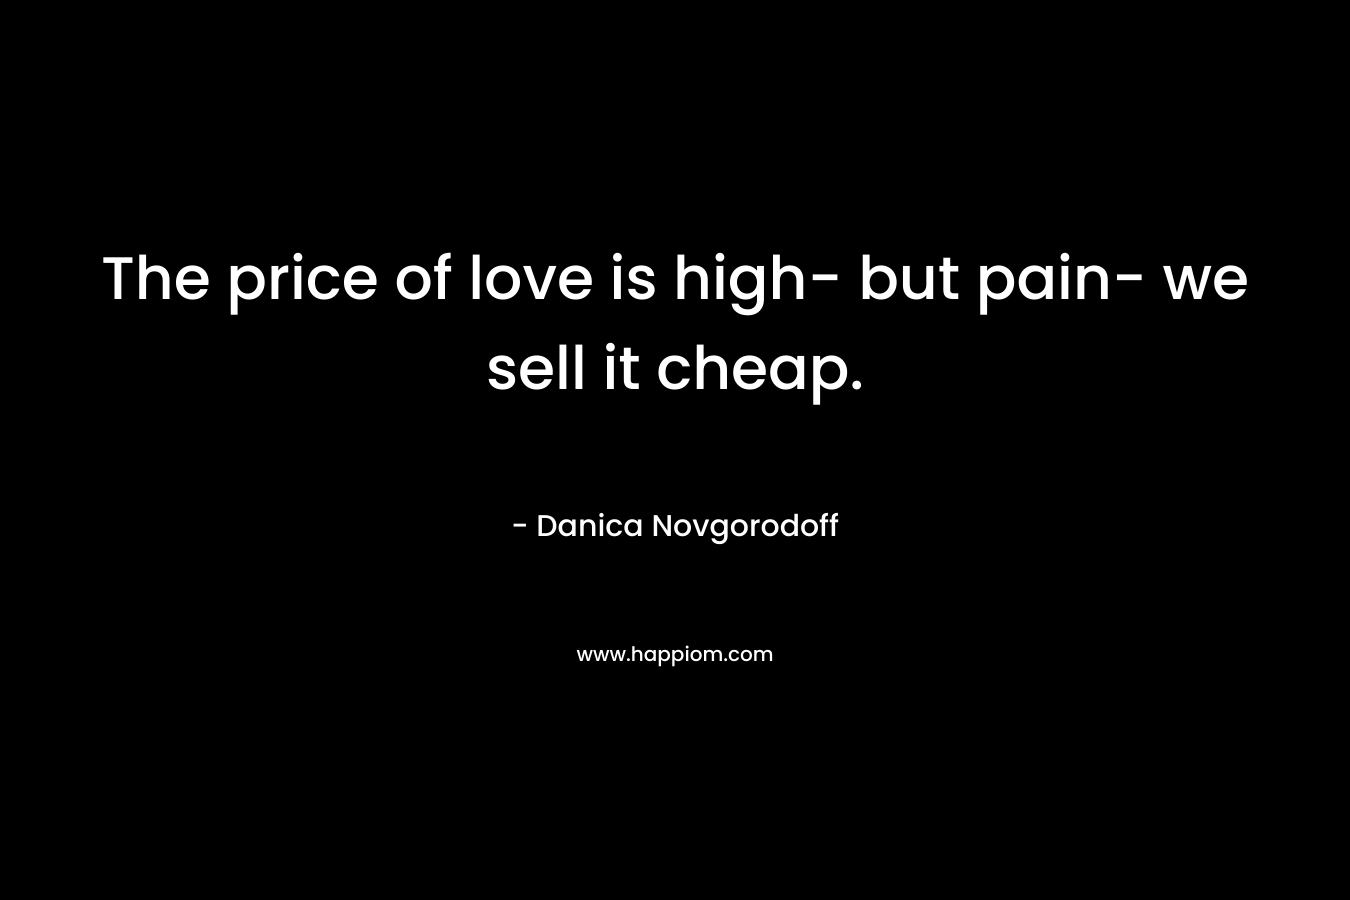 The price of love is high- but pain- we sell it cheap.